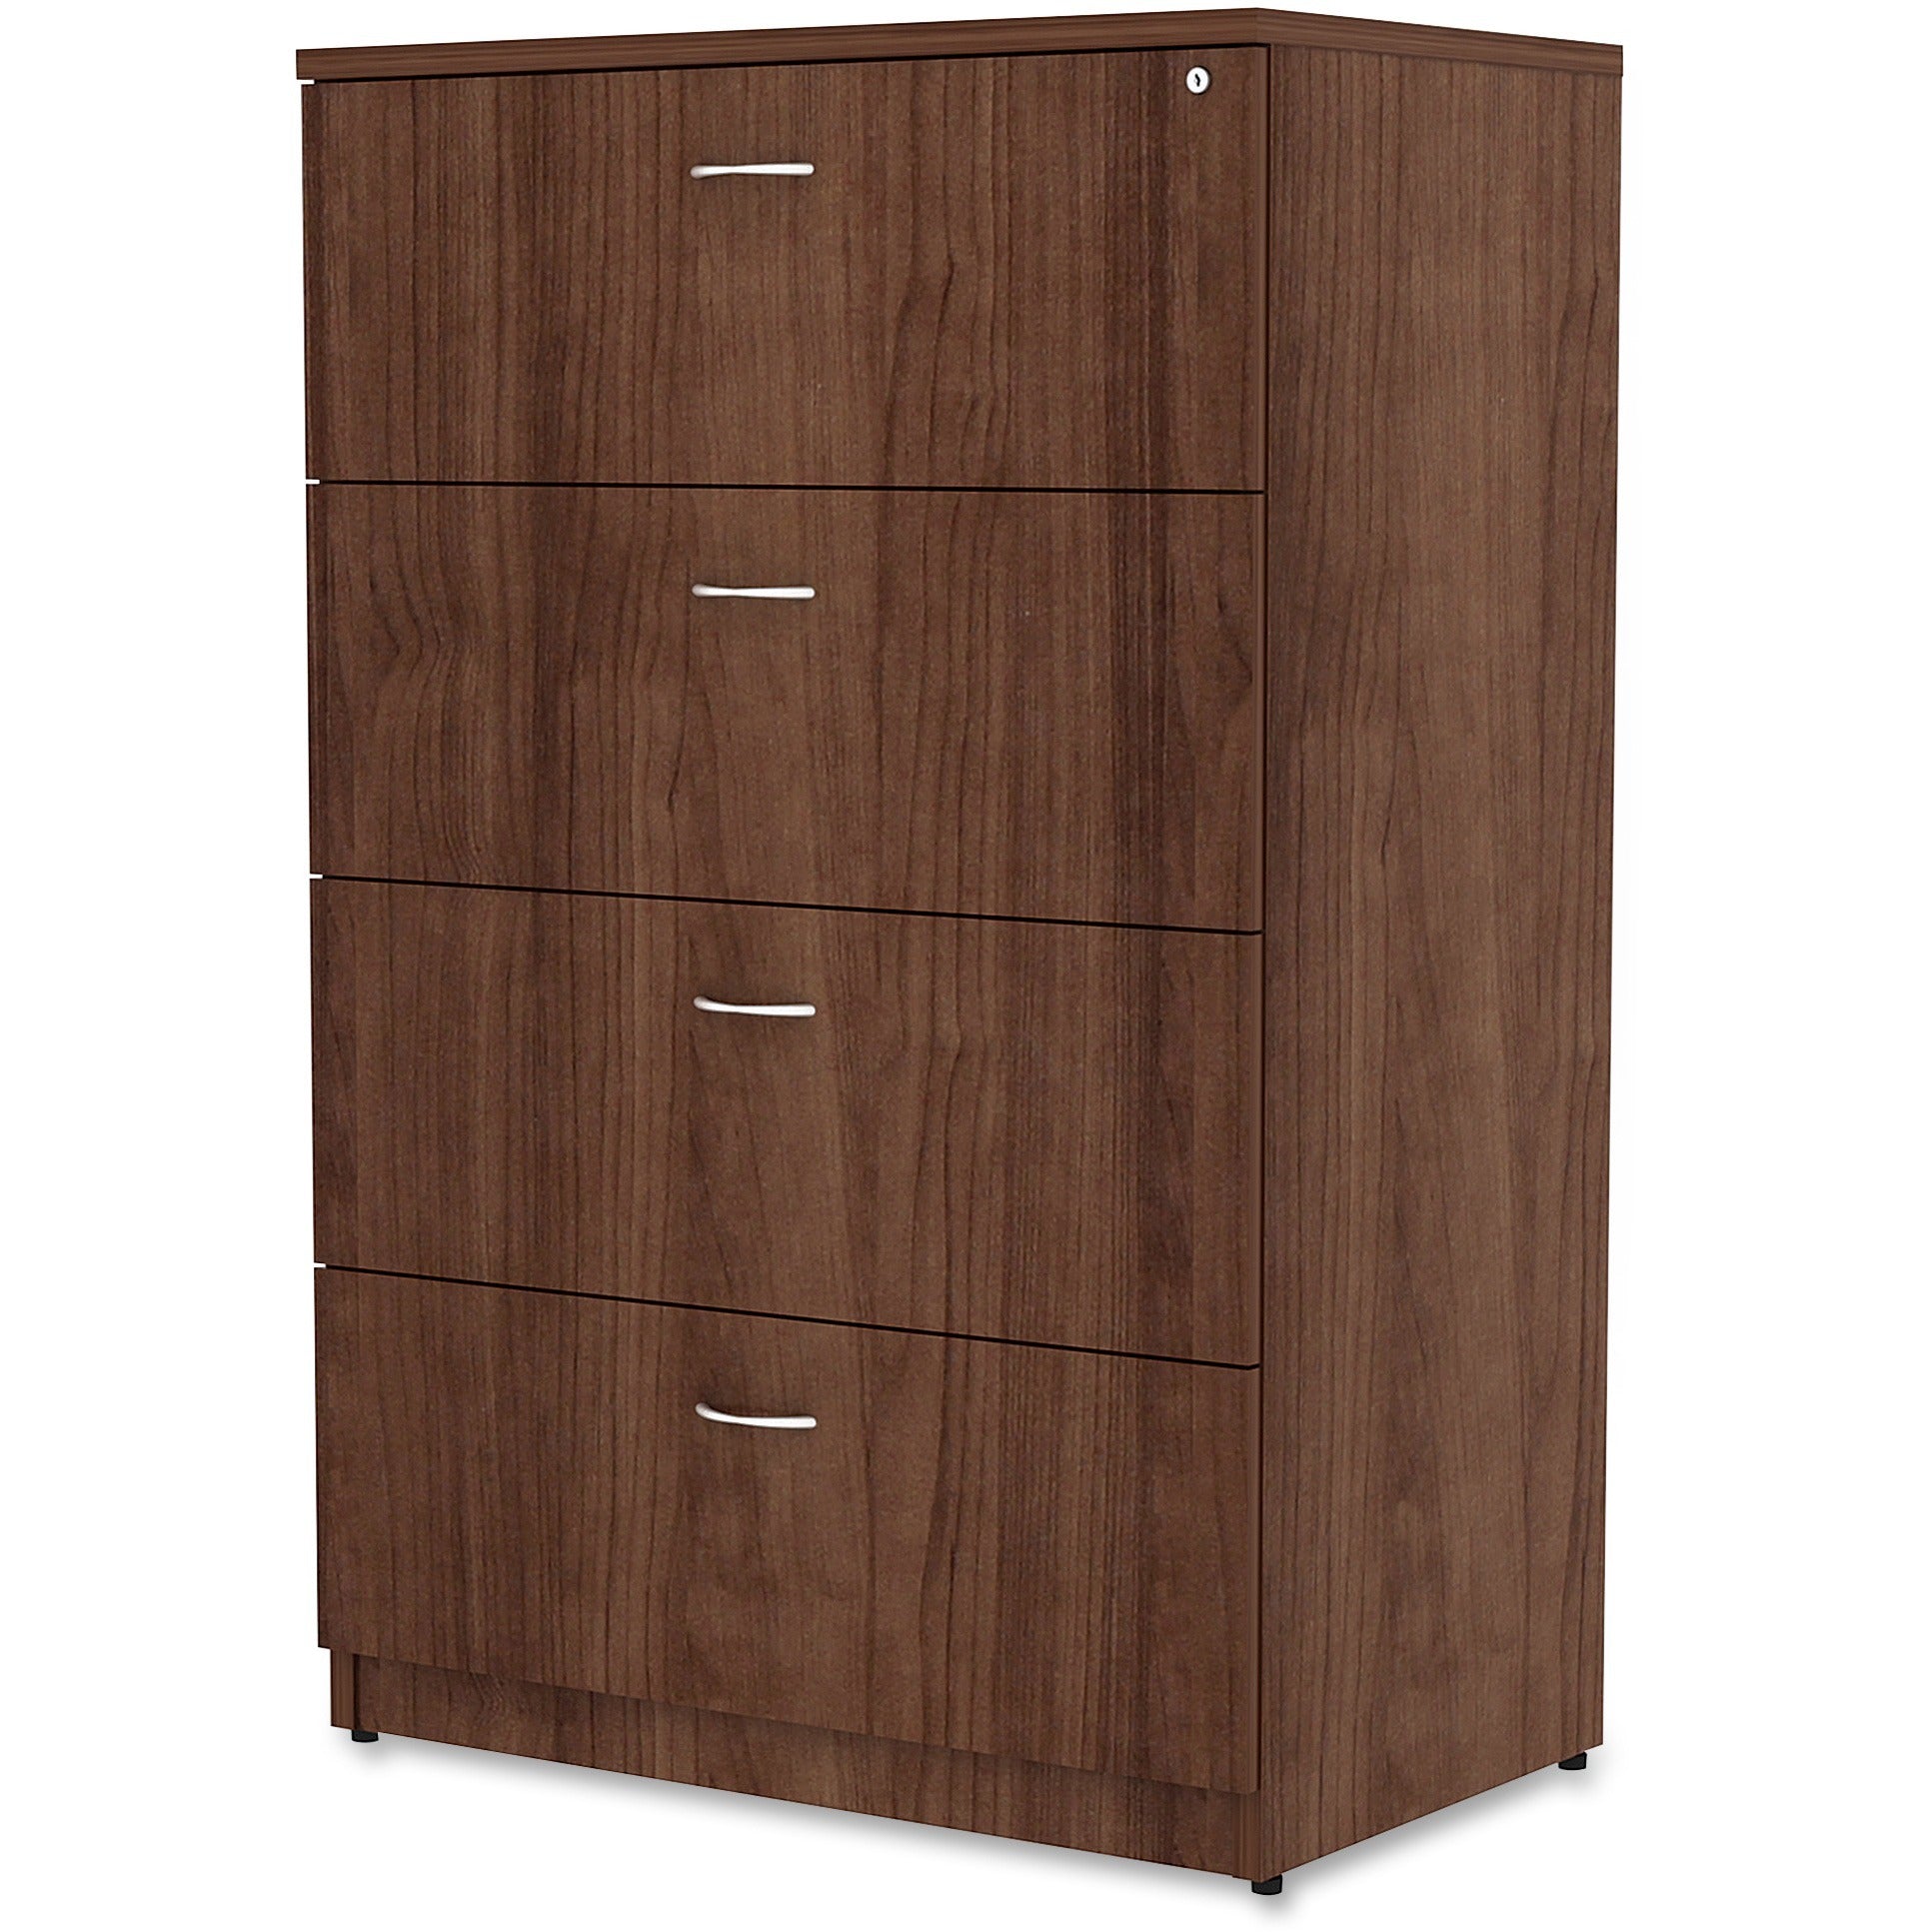 lorell-essentials-series-4-drawer-lateral-file-1-top-355-x-22548-4-x-file-drawers-finish-walnut-laminate_llr34388 - 3